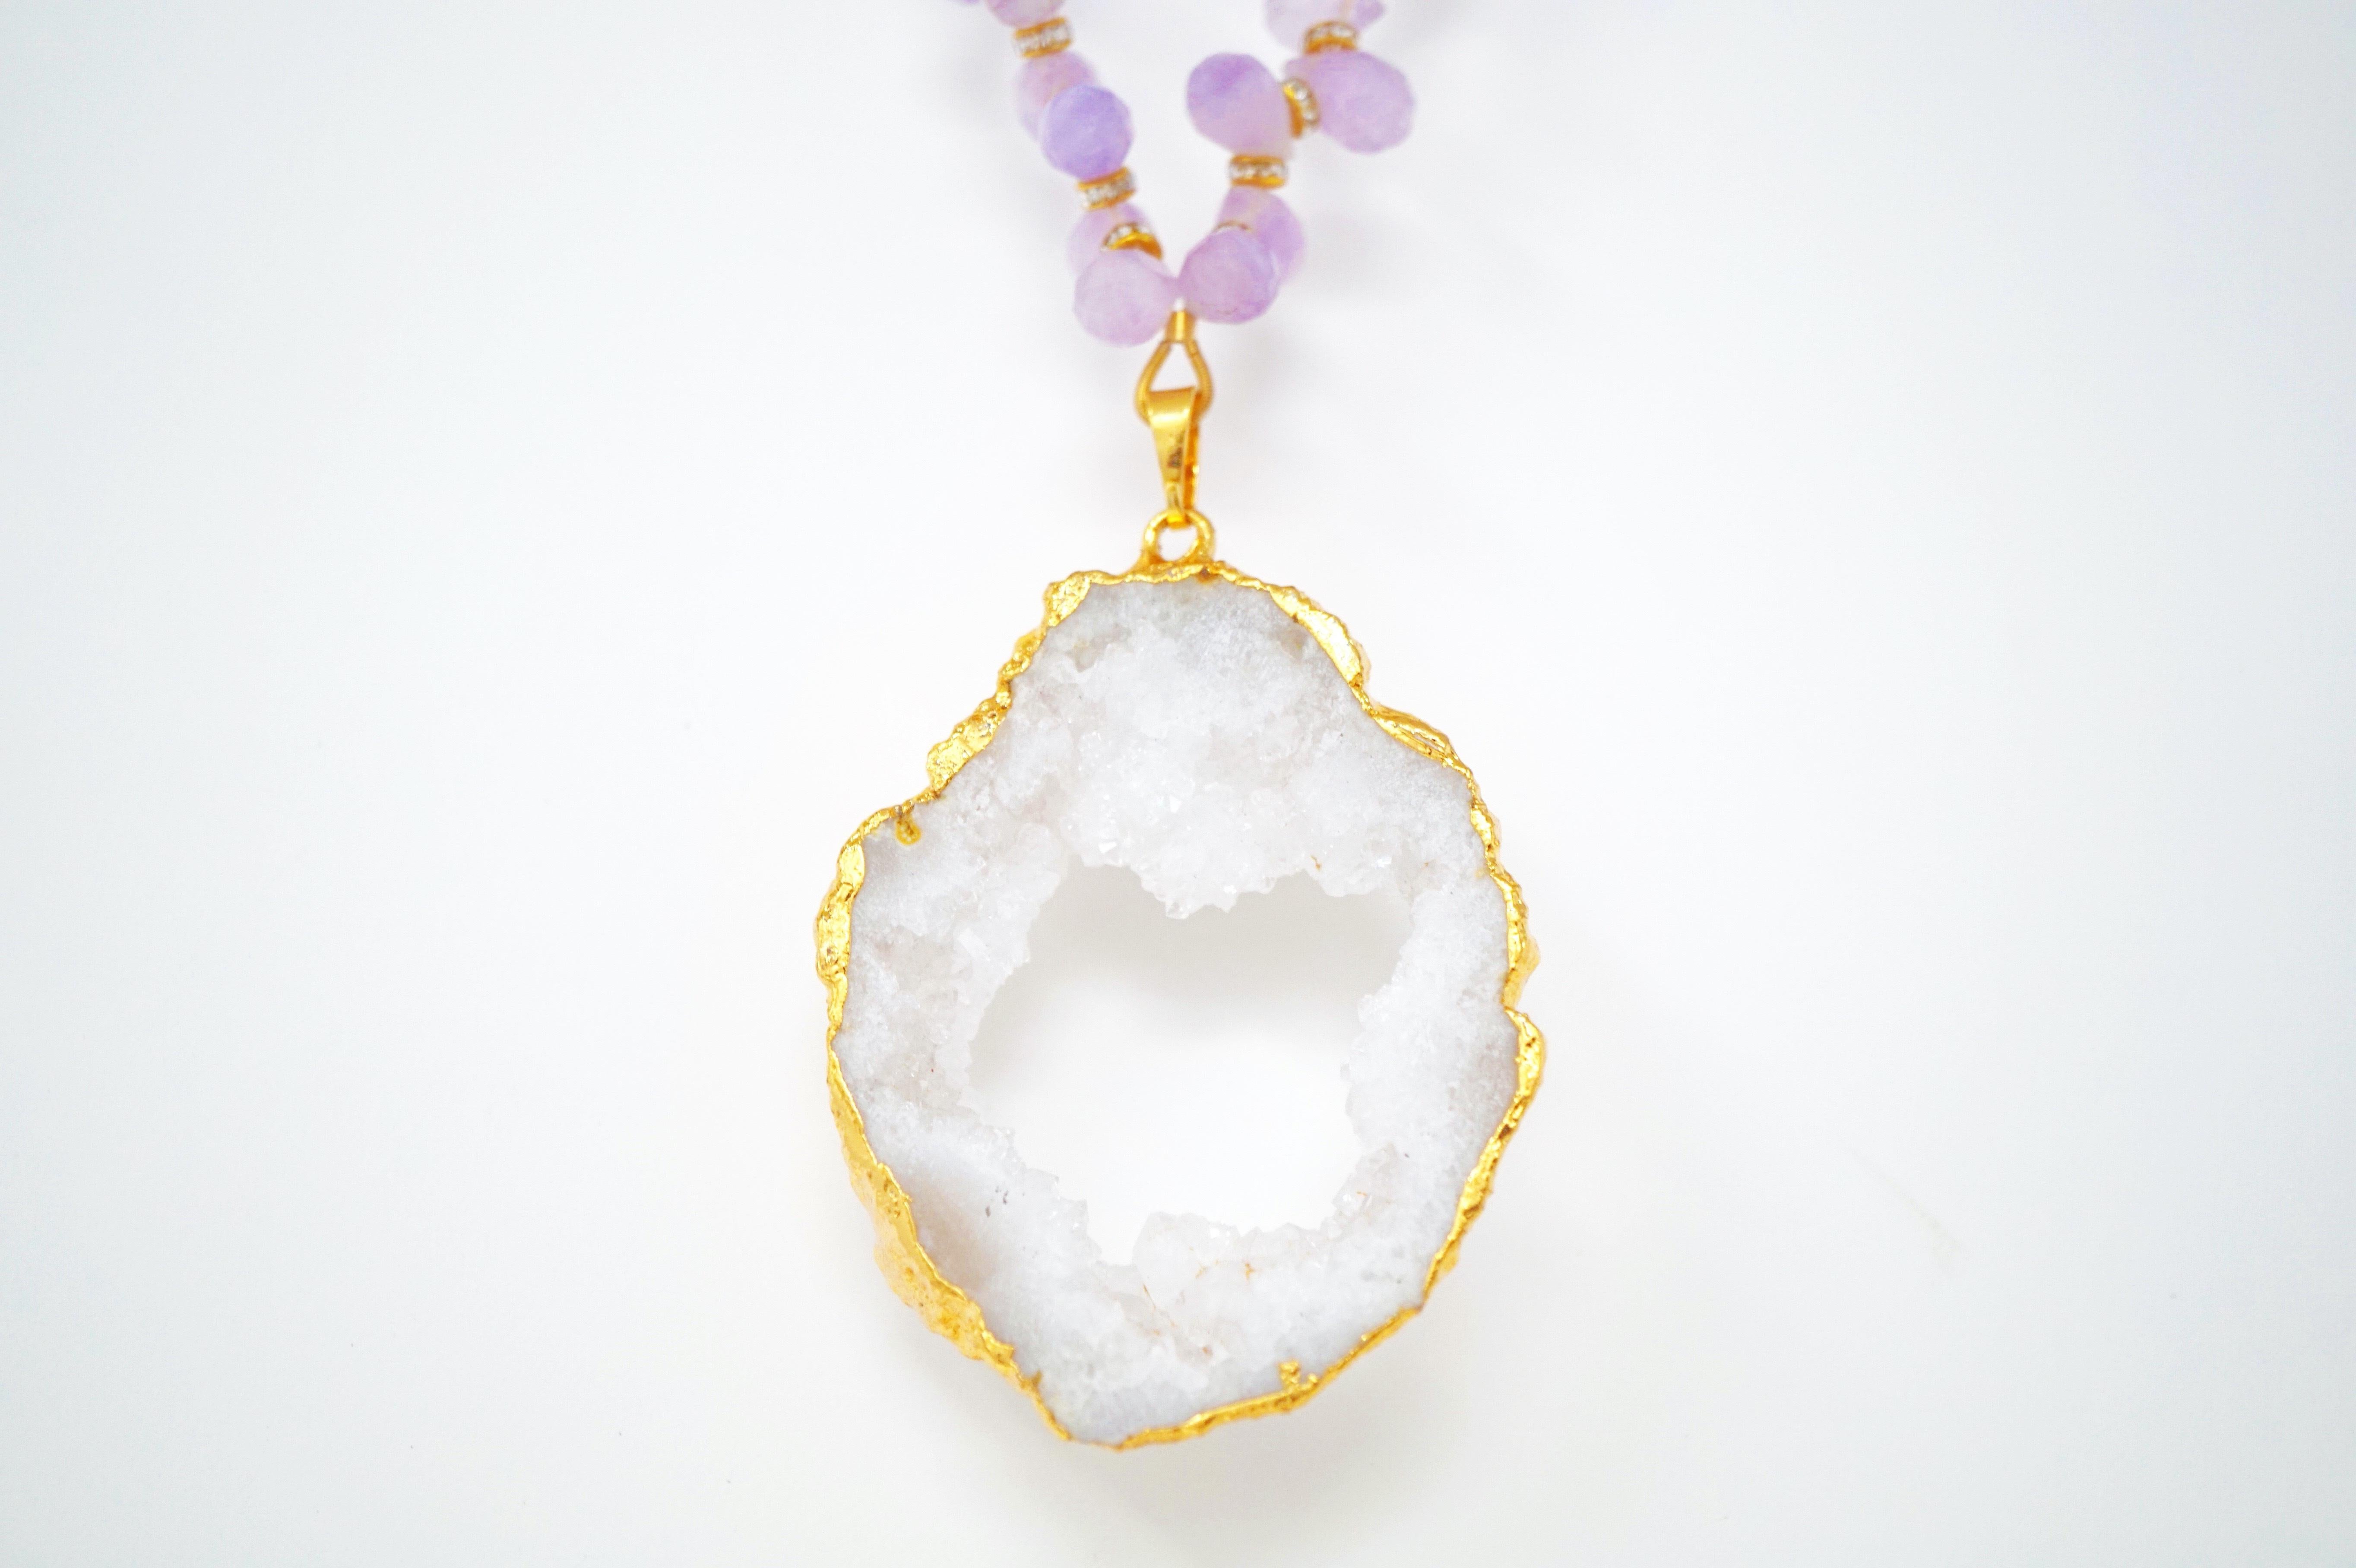 Women's Amethyst Gemstone Necklace with Swarovski Accents and Gilded Druzy Geode Pendant For Sale